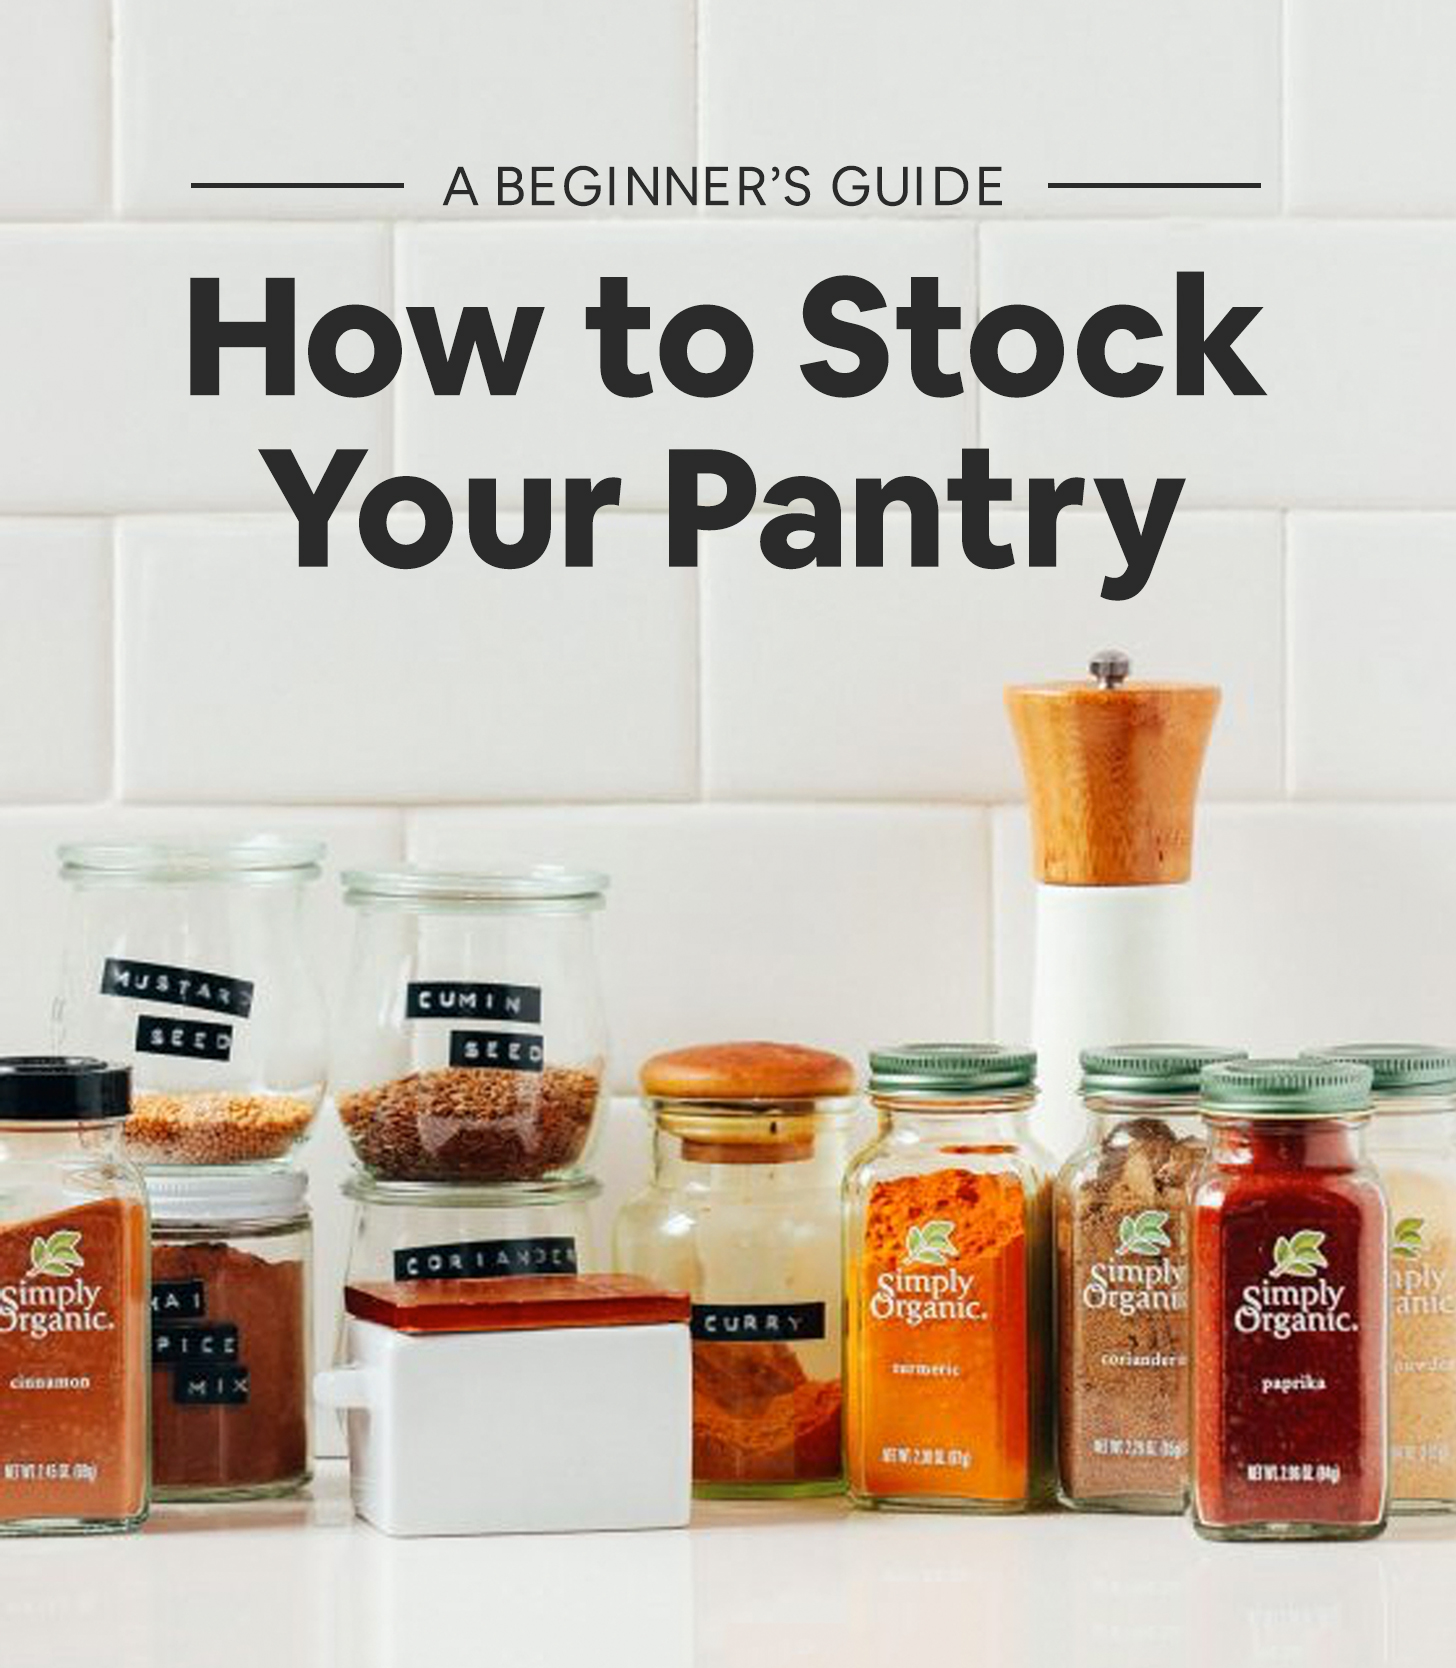 Assortment of essential spices included in our guide on How to Stock Your Pantry